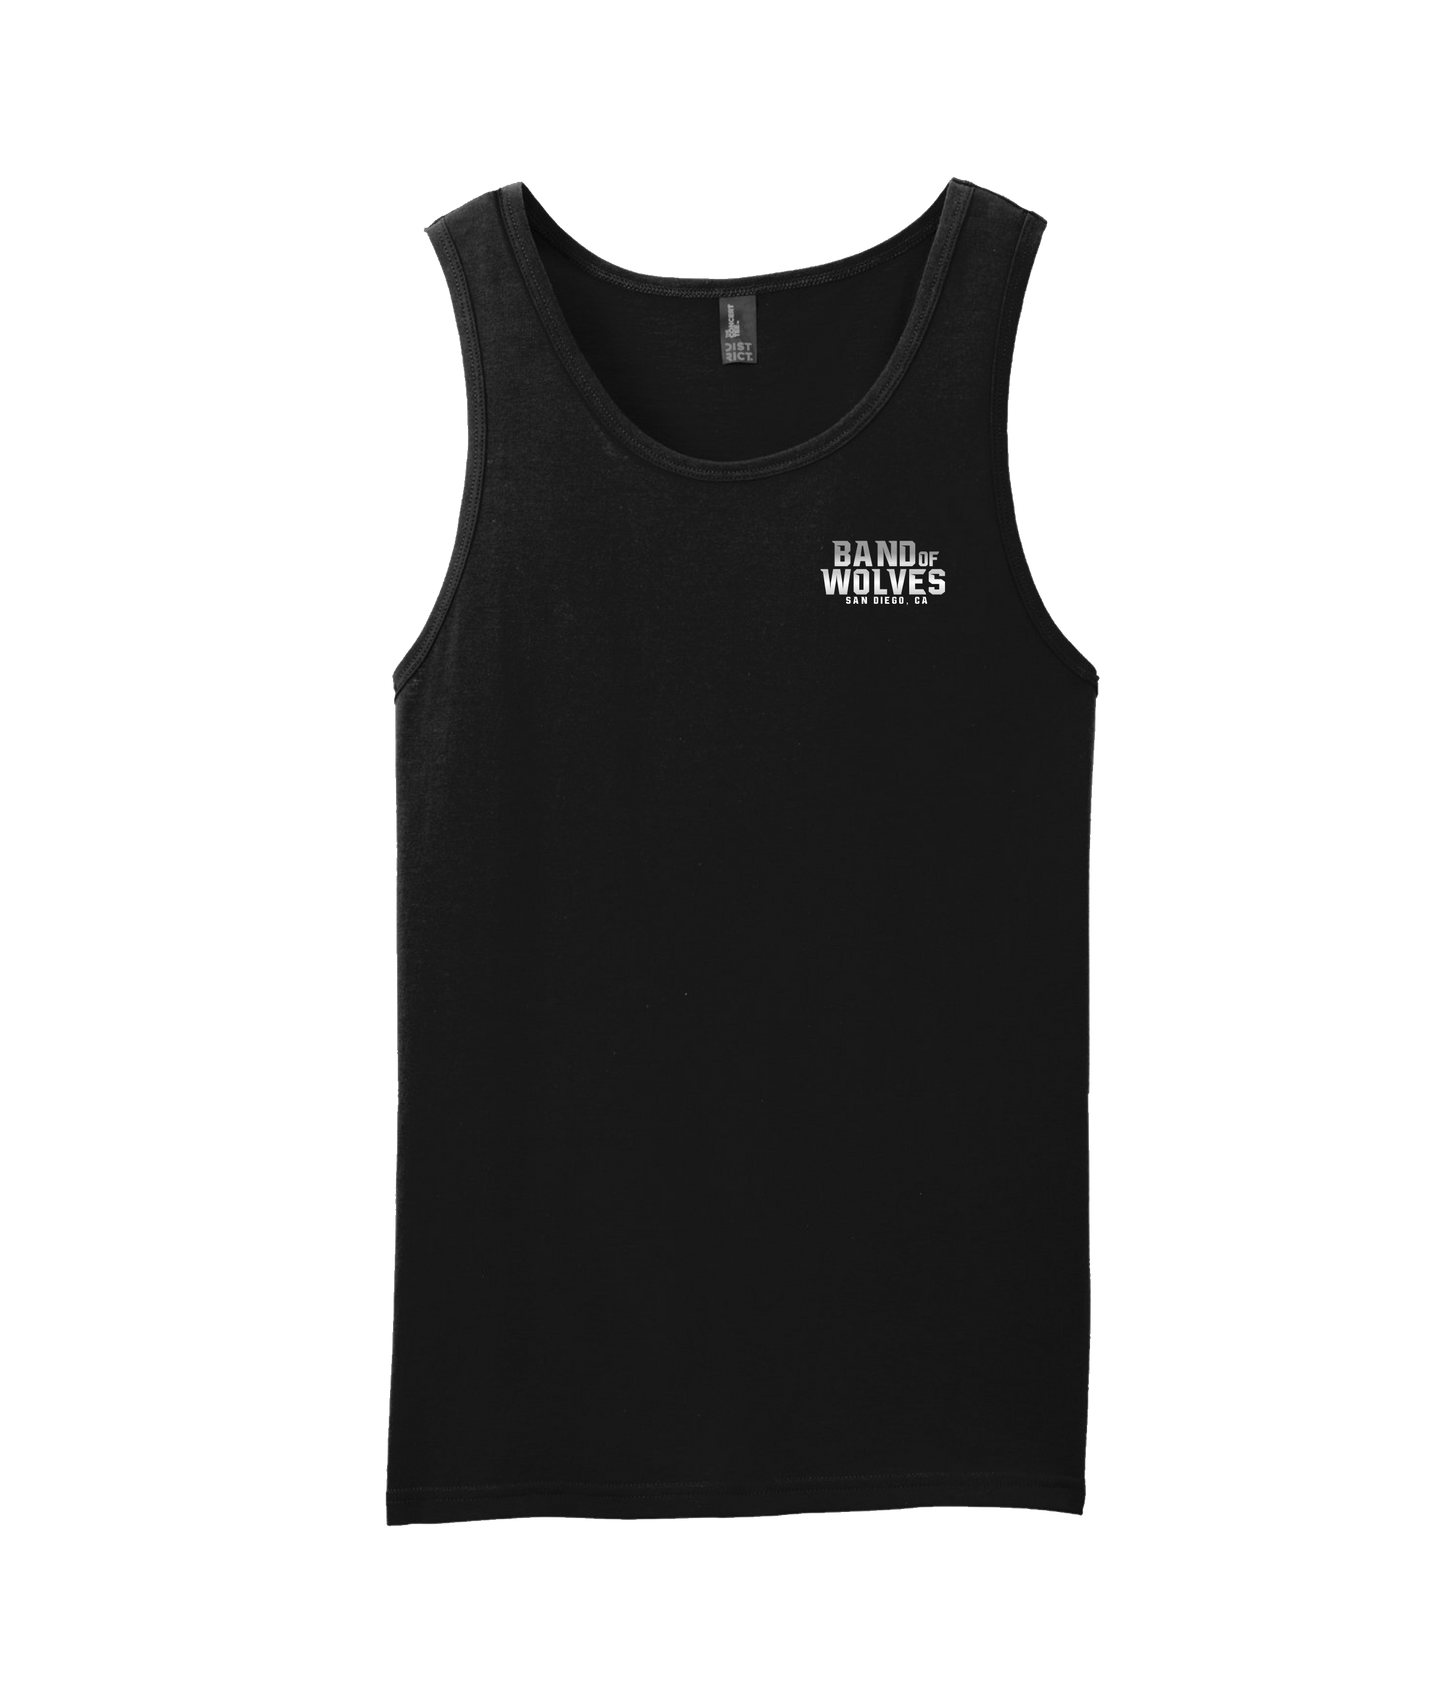 Band of Wolves - Howlin' At The Moon - Black Tank Top